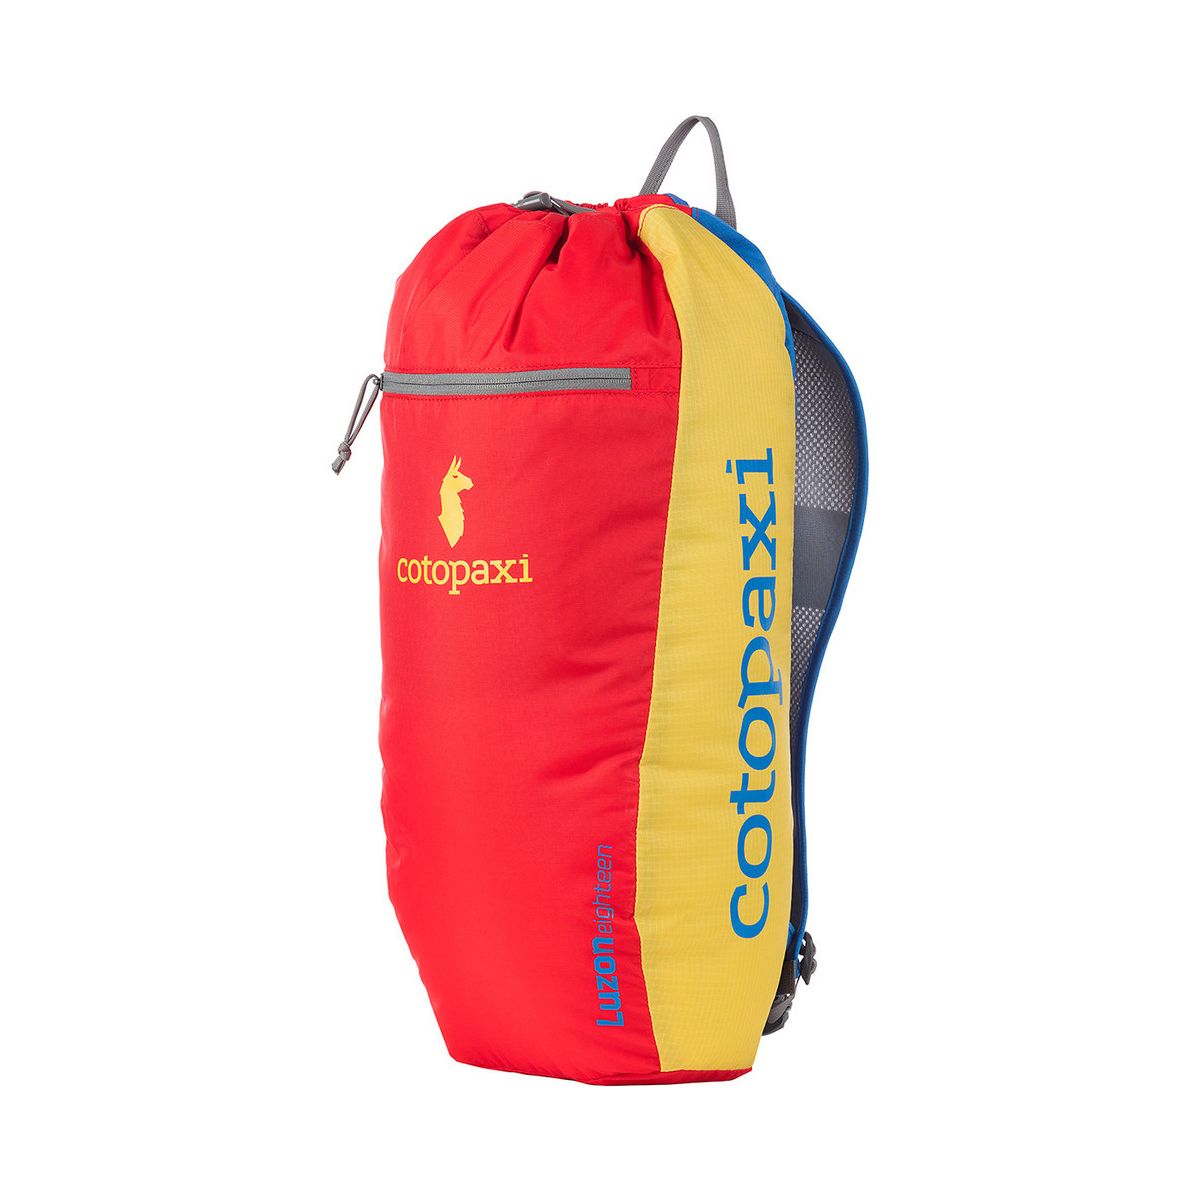 Cotopaxi Luzon Backpack 1098CU In | eBay